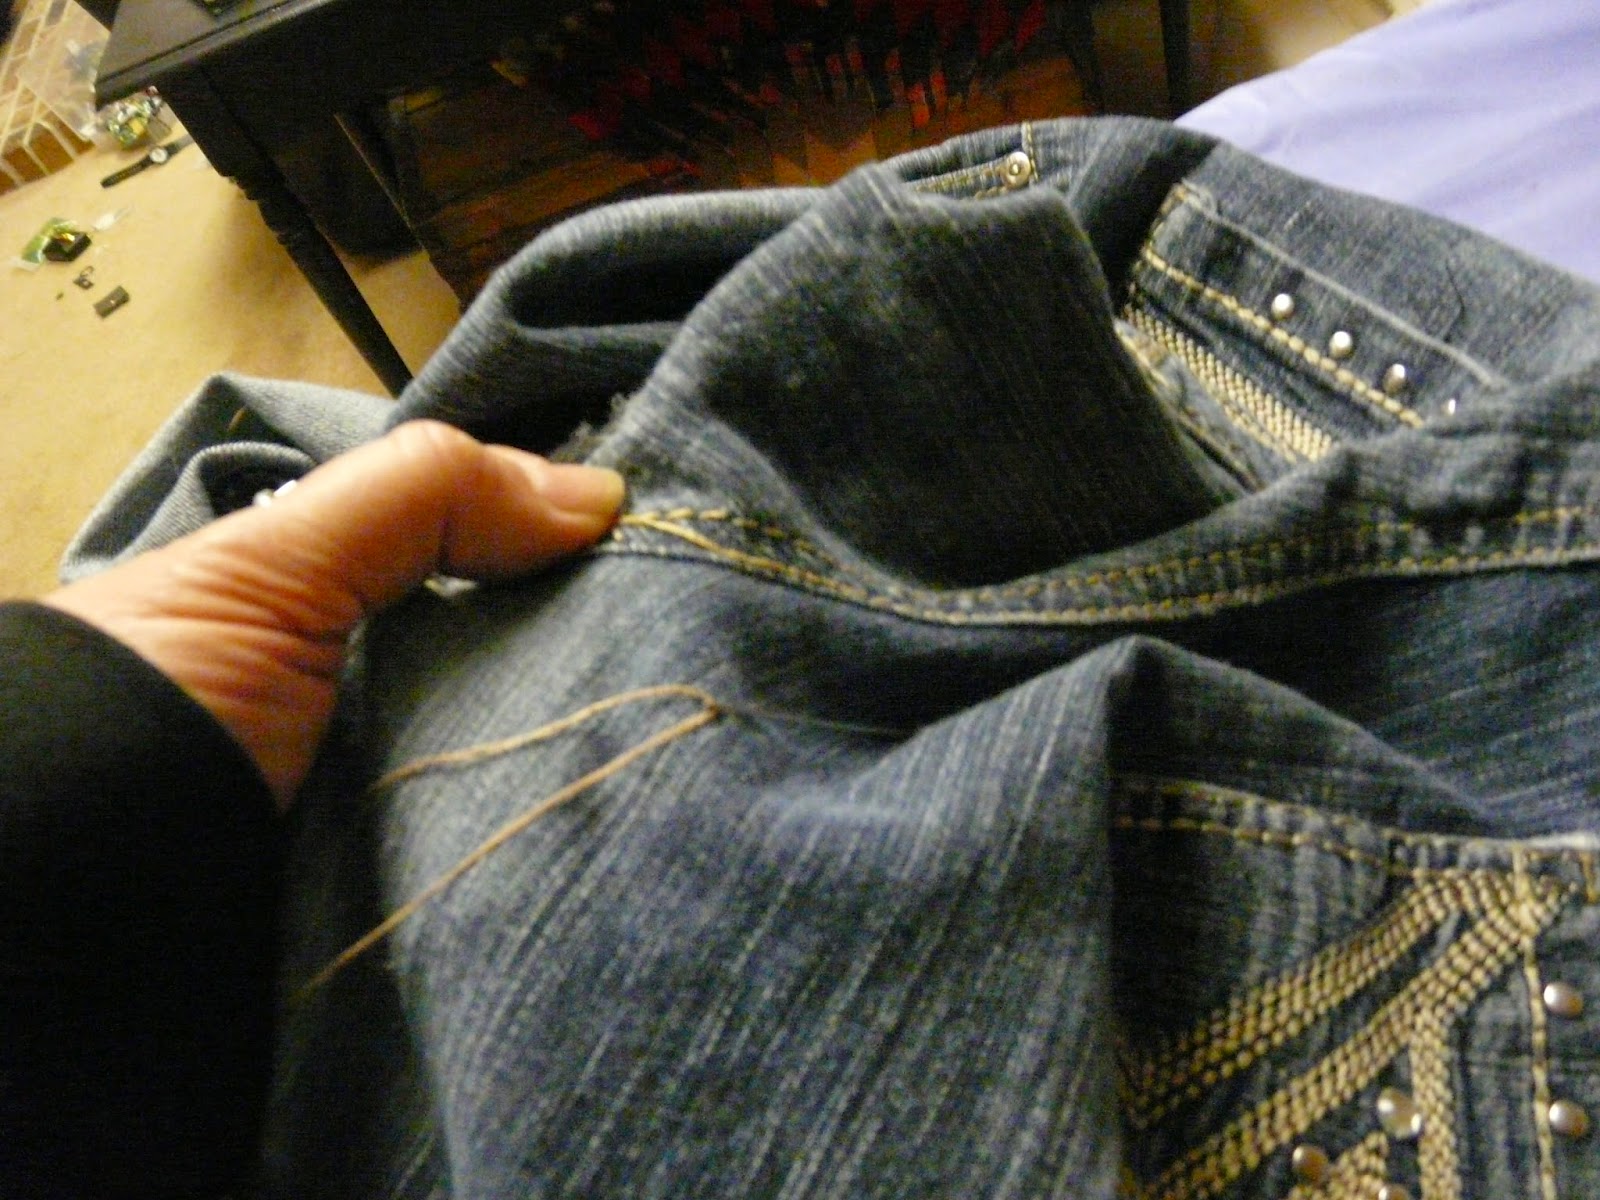 How To Patch Holes In Crotch Of Pants